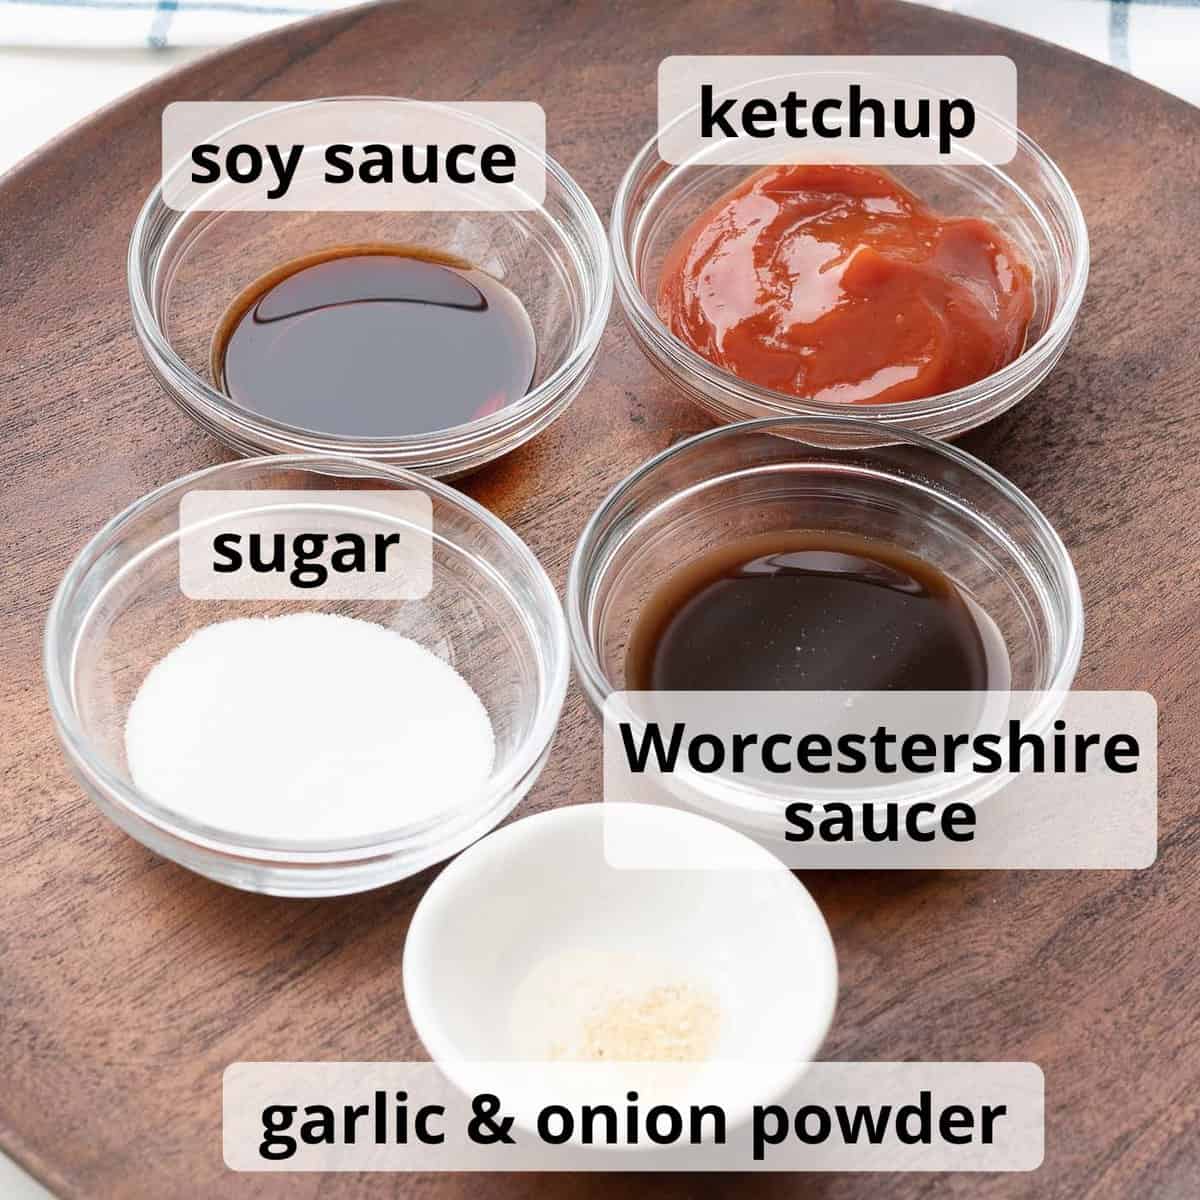 Ingredients for katsu sauce with text labels.